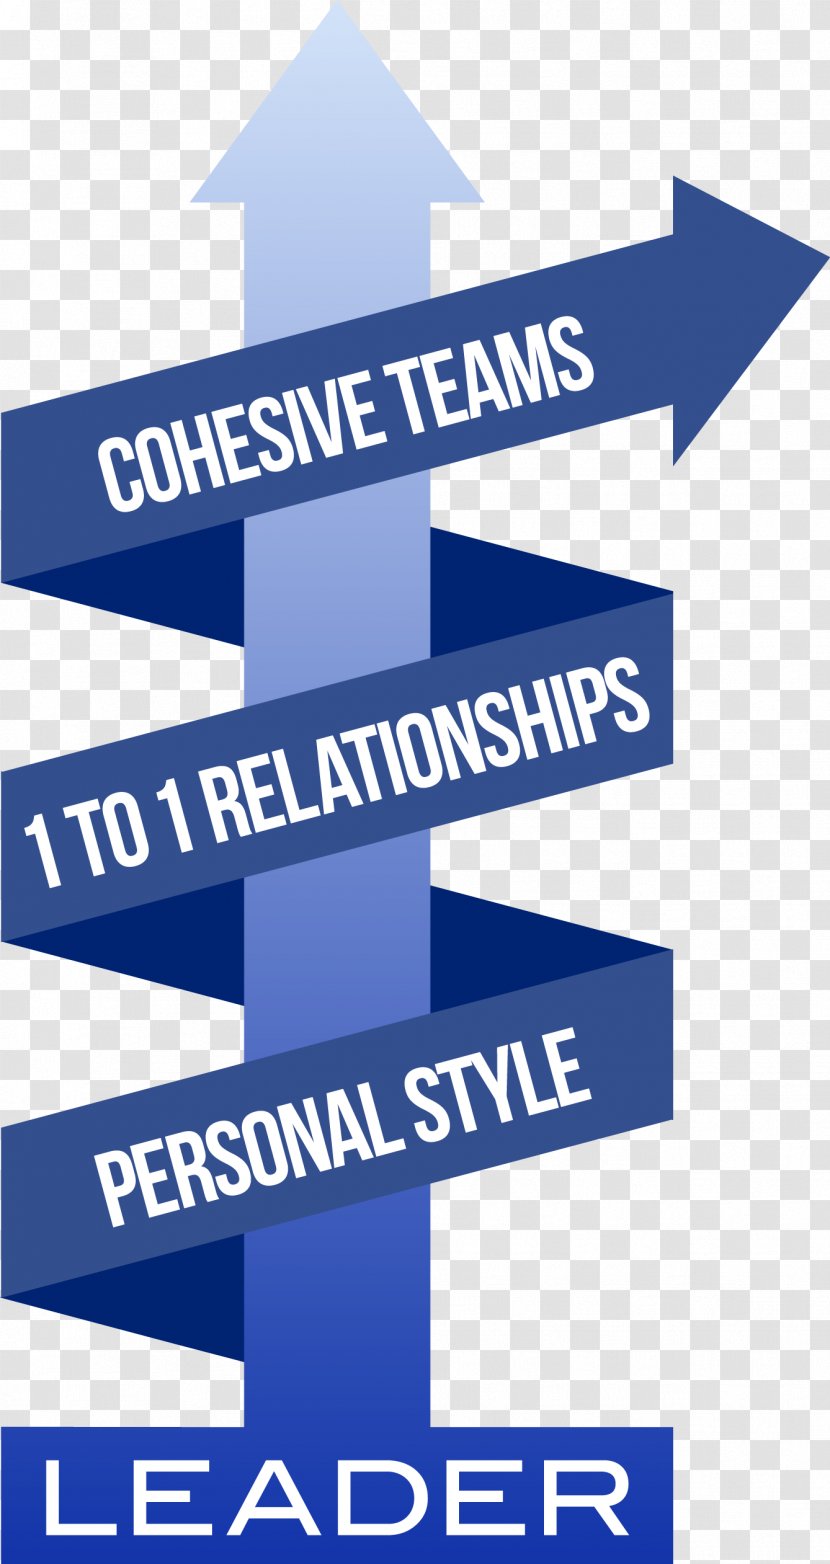 Leadership Style Organization Bishop House Consulting Three Levels Of Model - Selfawareness - Situational Transparent PNG